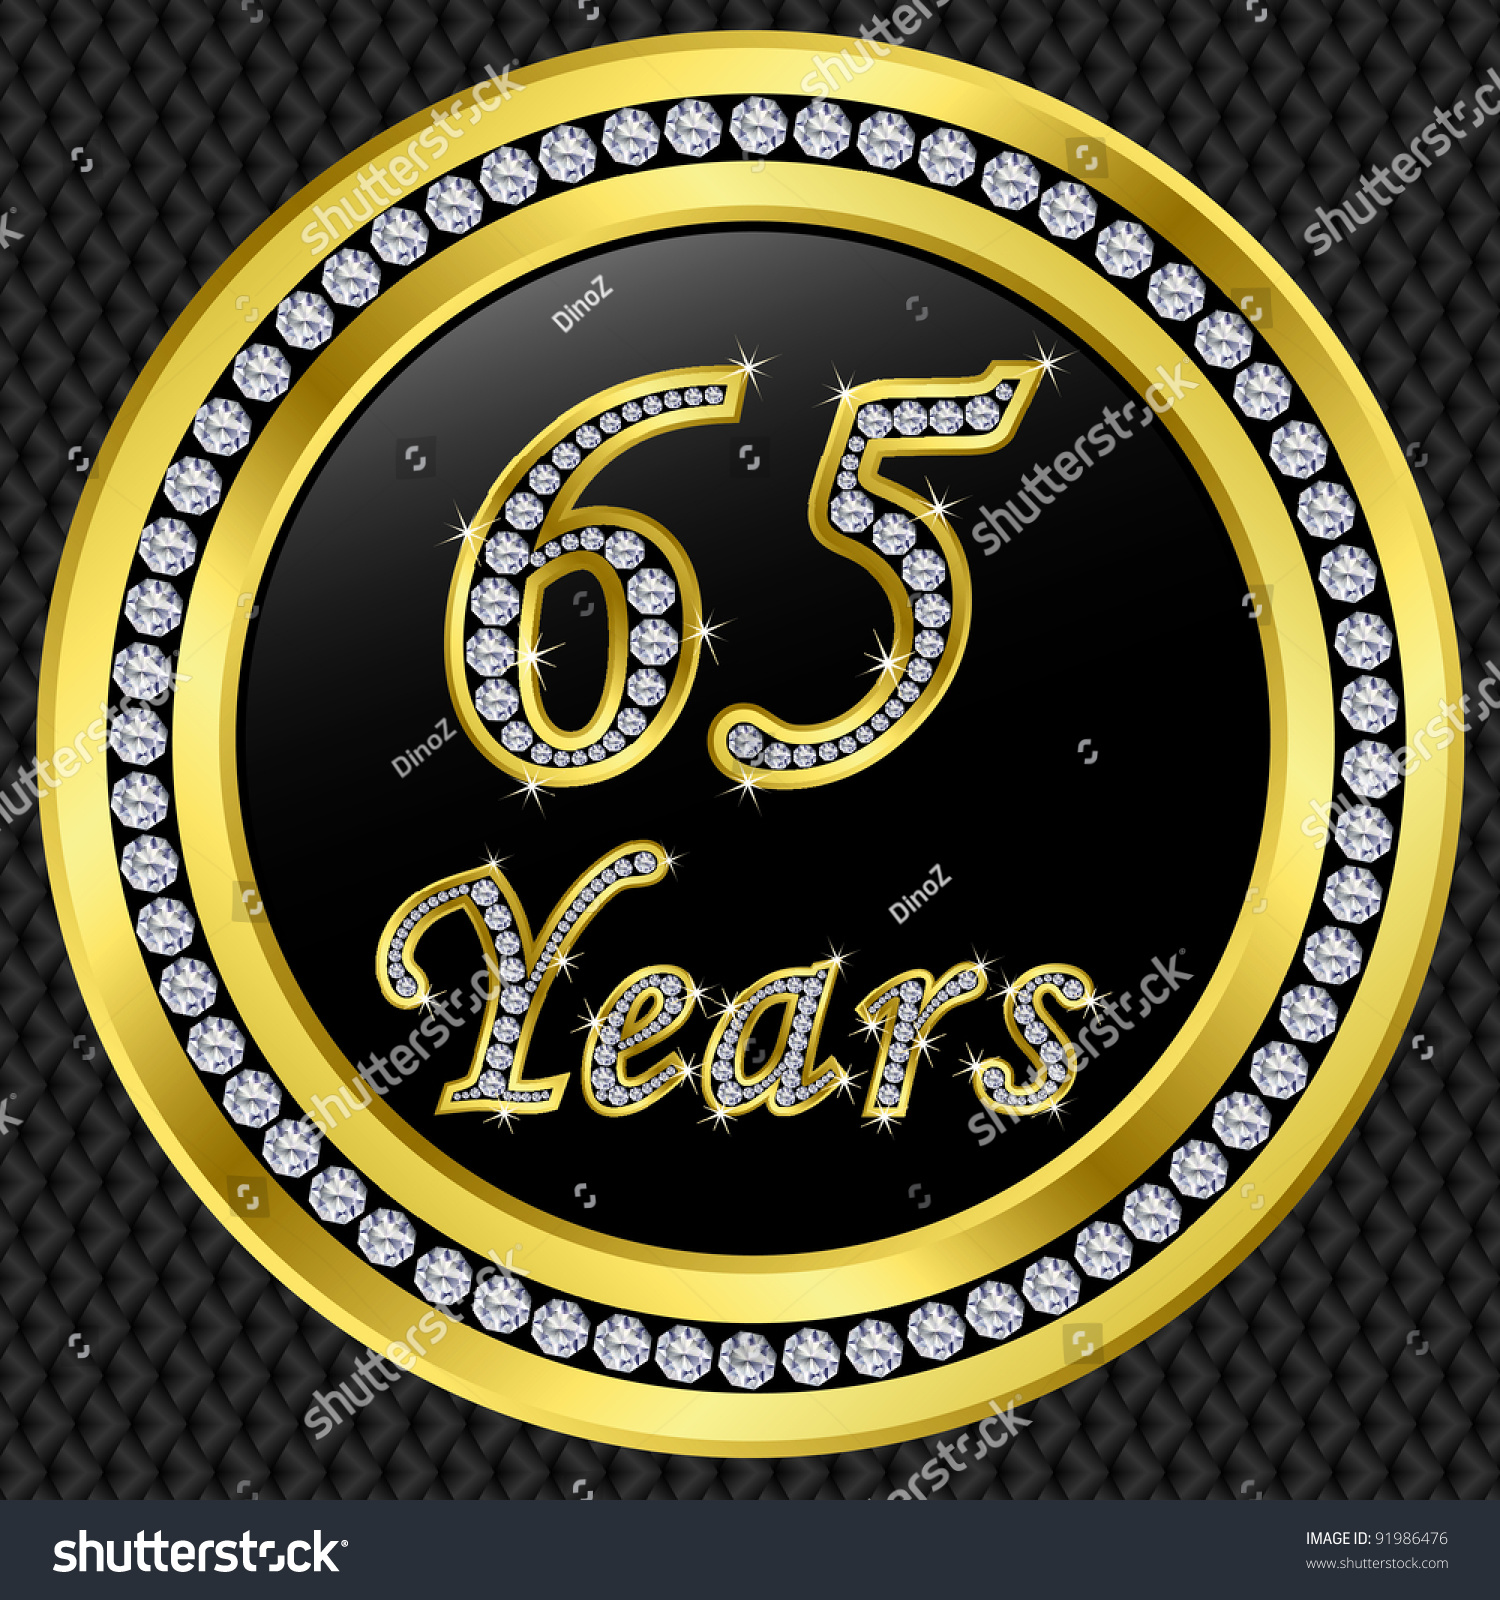 SVG of 65 years anniversary golden icon with diamonds, vector illustration svg